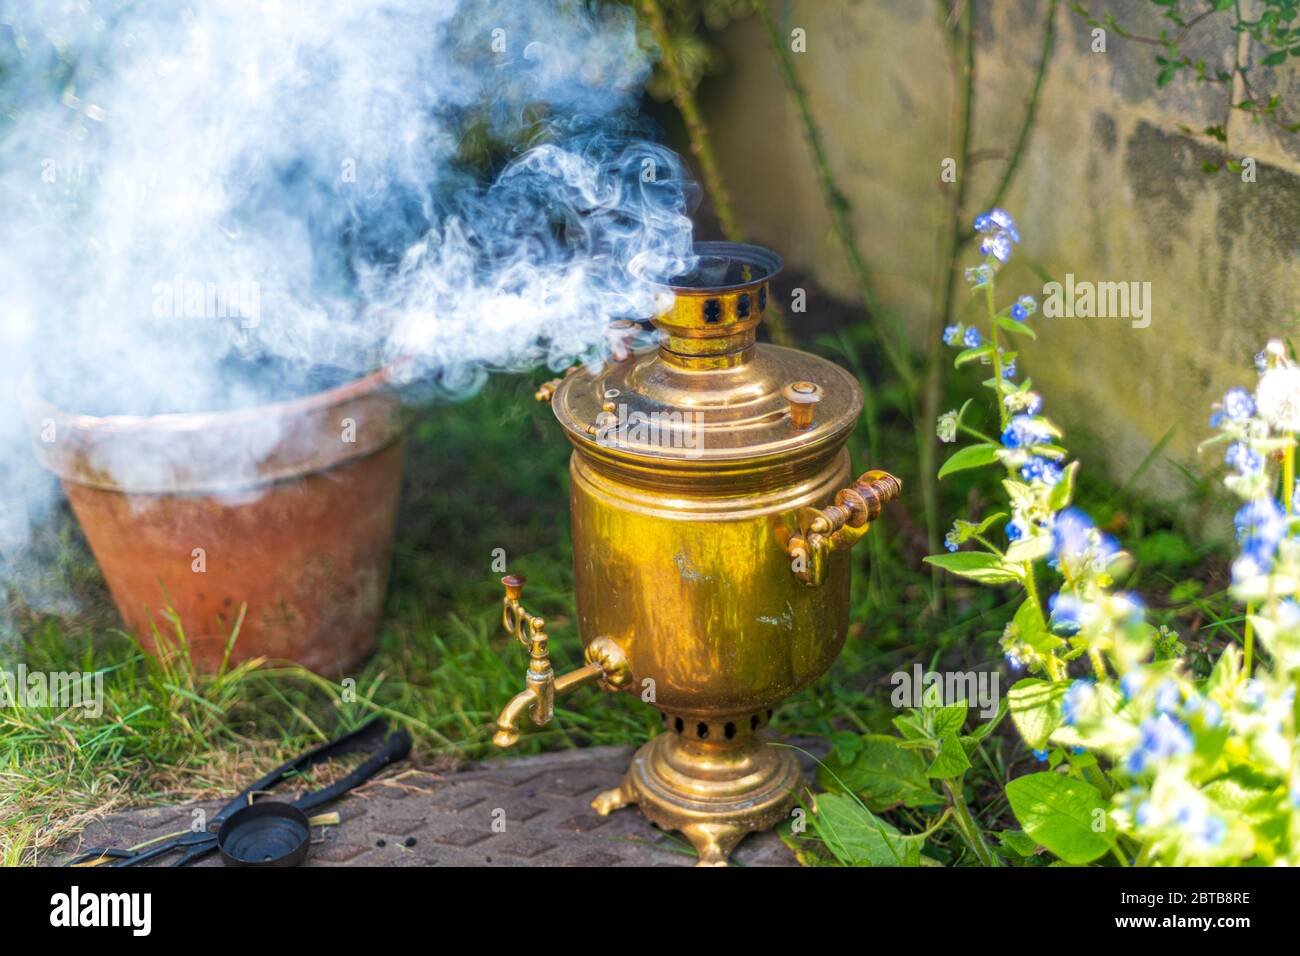 Old vintage samovar with smoke. Brewing tea in the old fashioned way. Russian ceremony Stock Photo